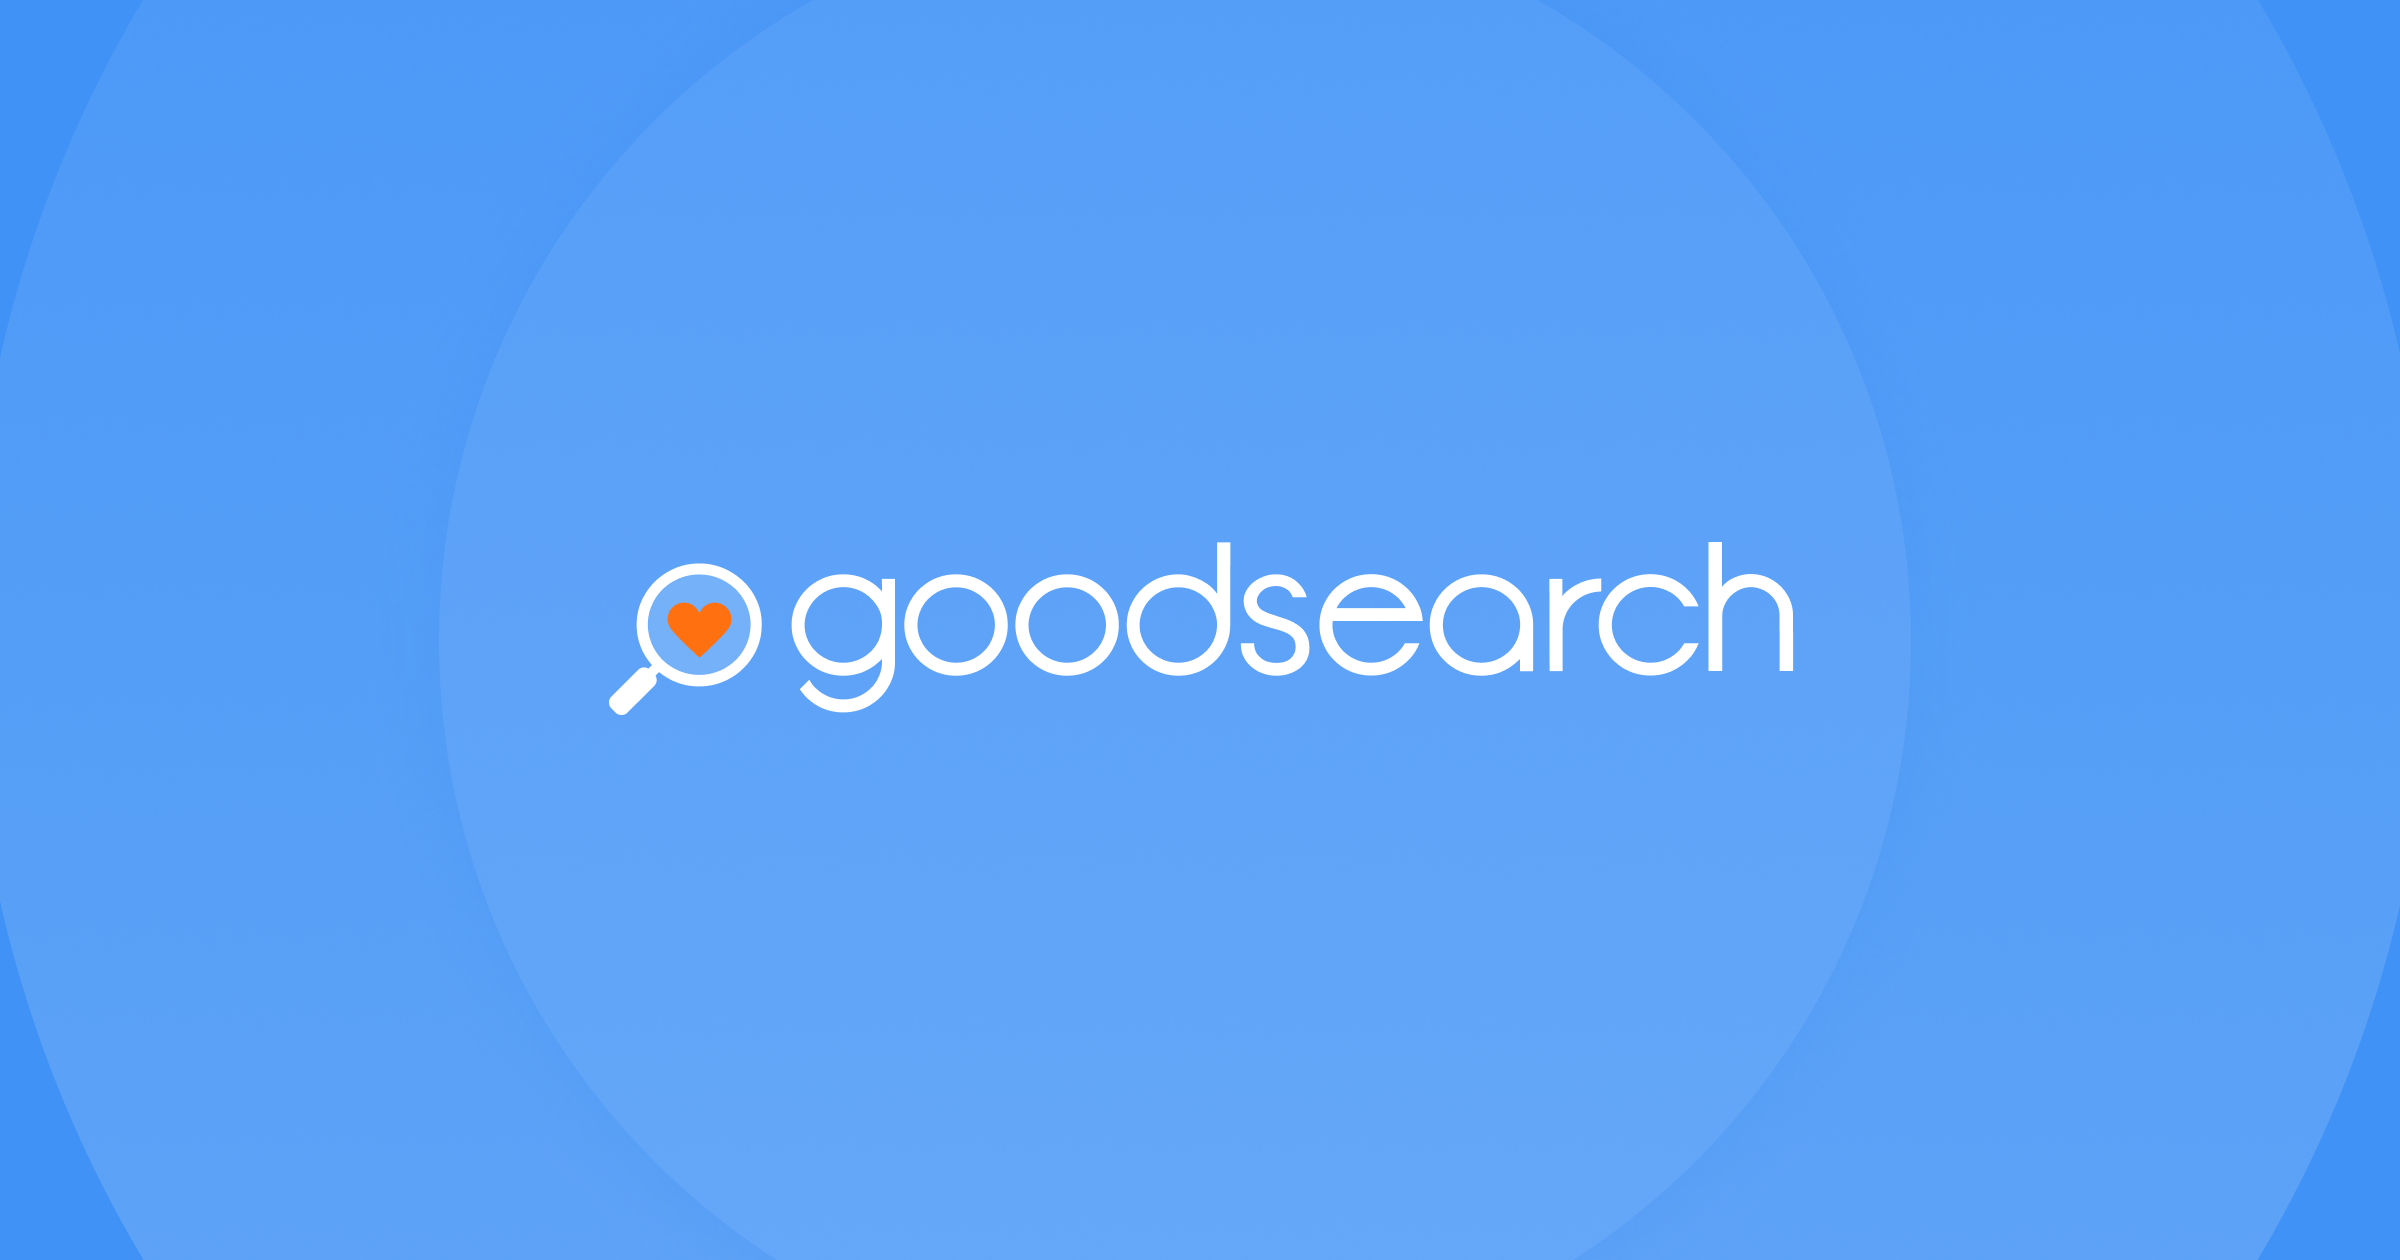 https://www.goodsearch.com/cloudinary/image/upload/v1675148407/goodsearch/goodsearch-og.png